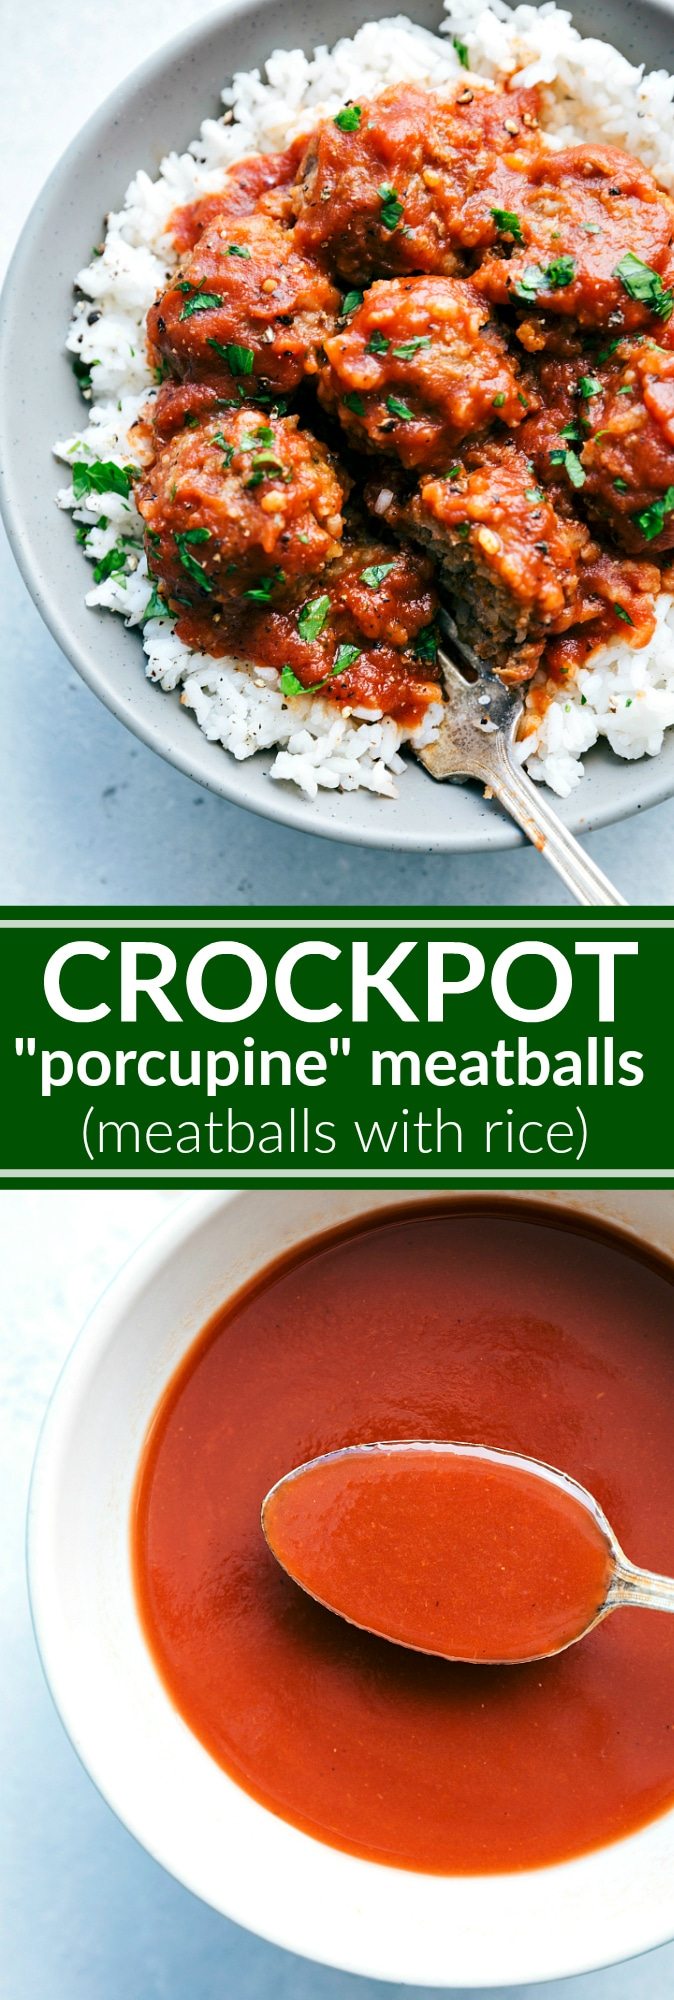 CROCKPOT PORCUPINE MEATBALLS! Delicious and easy porcupine meatballs that take minutes to make and cook in your crockpot. Little prep and impressive results! via chelseasmessyapron.com